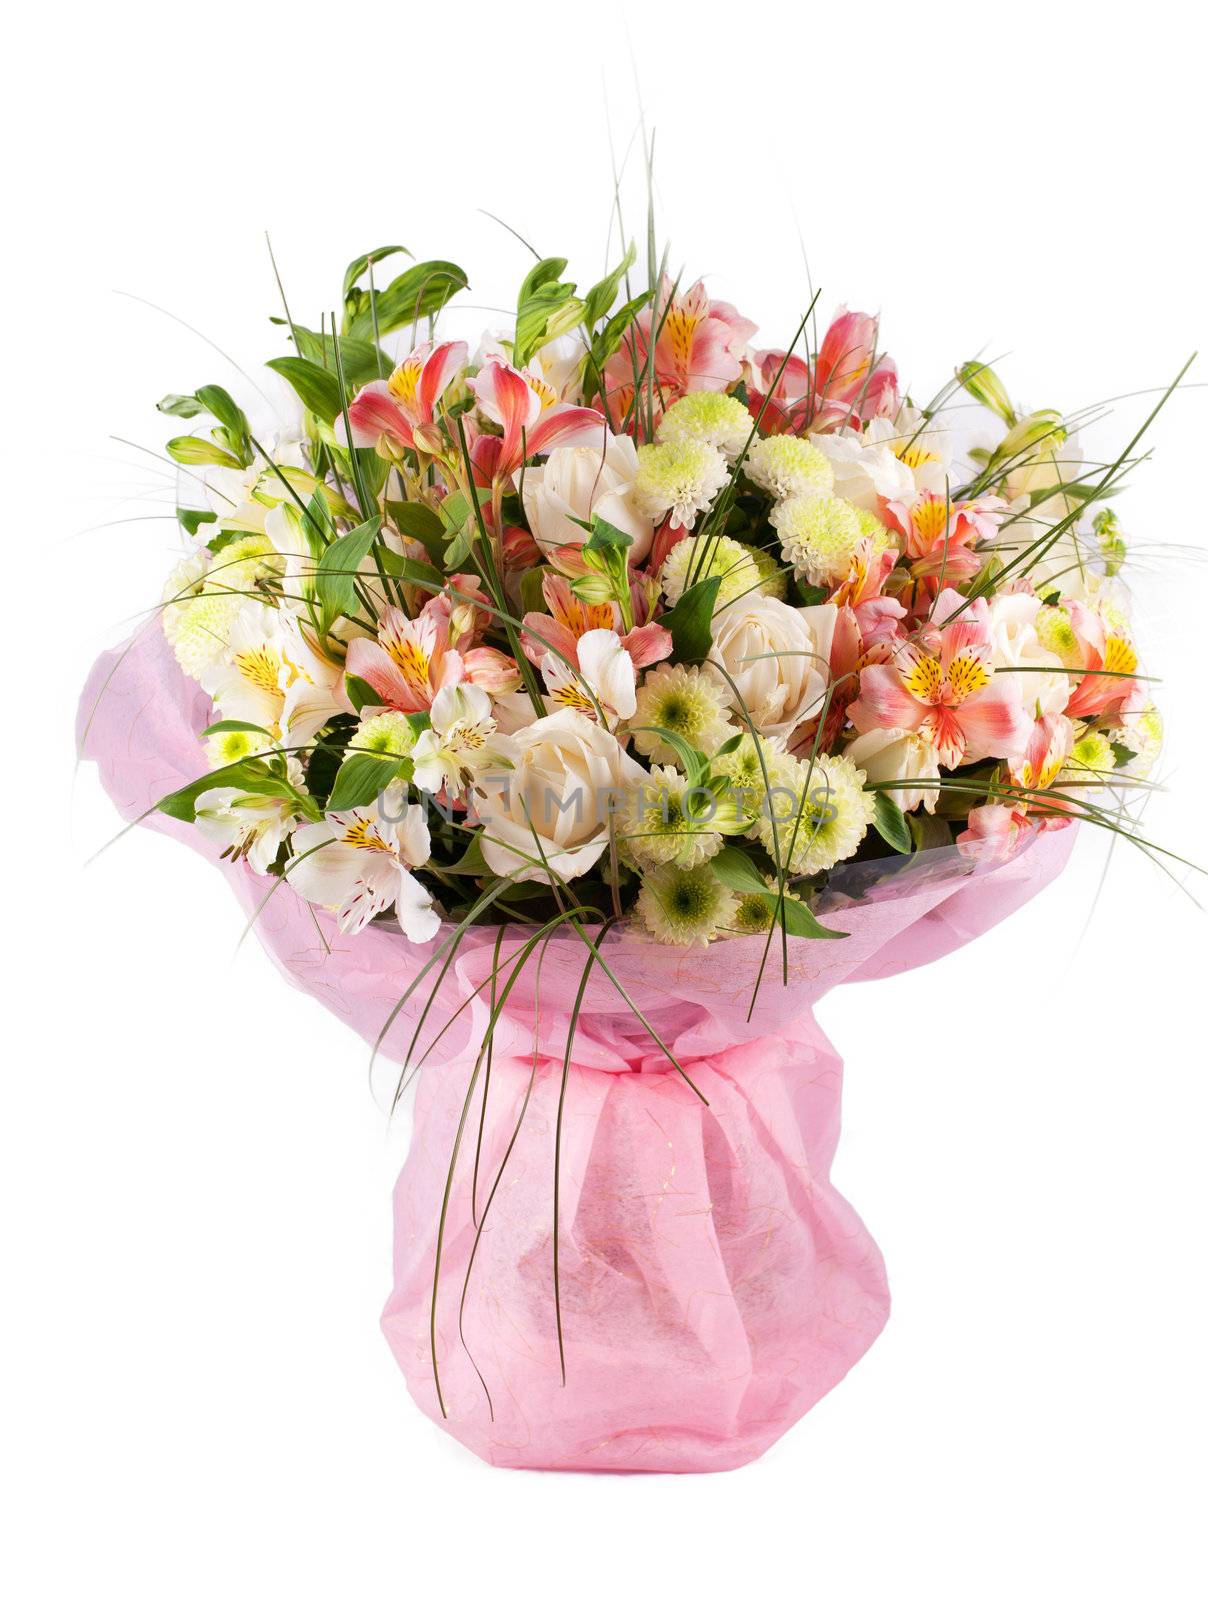 Spring flowers bouquet with a lot of different flowers